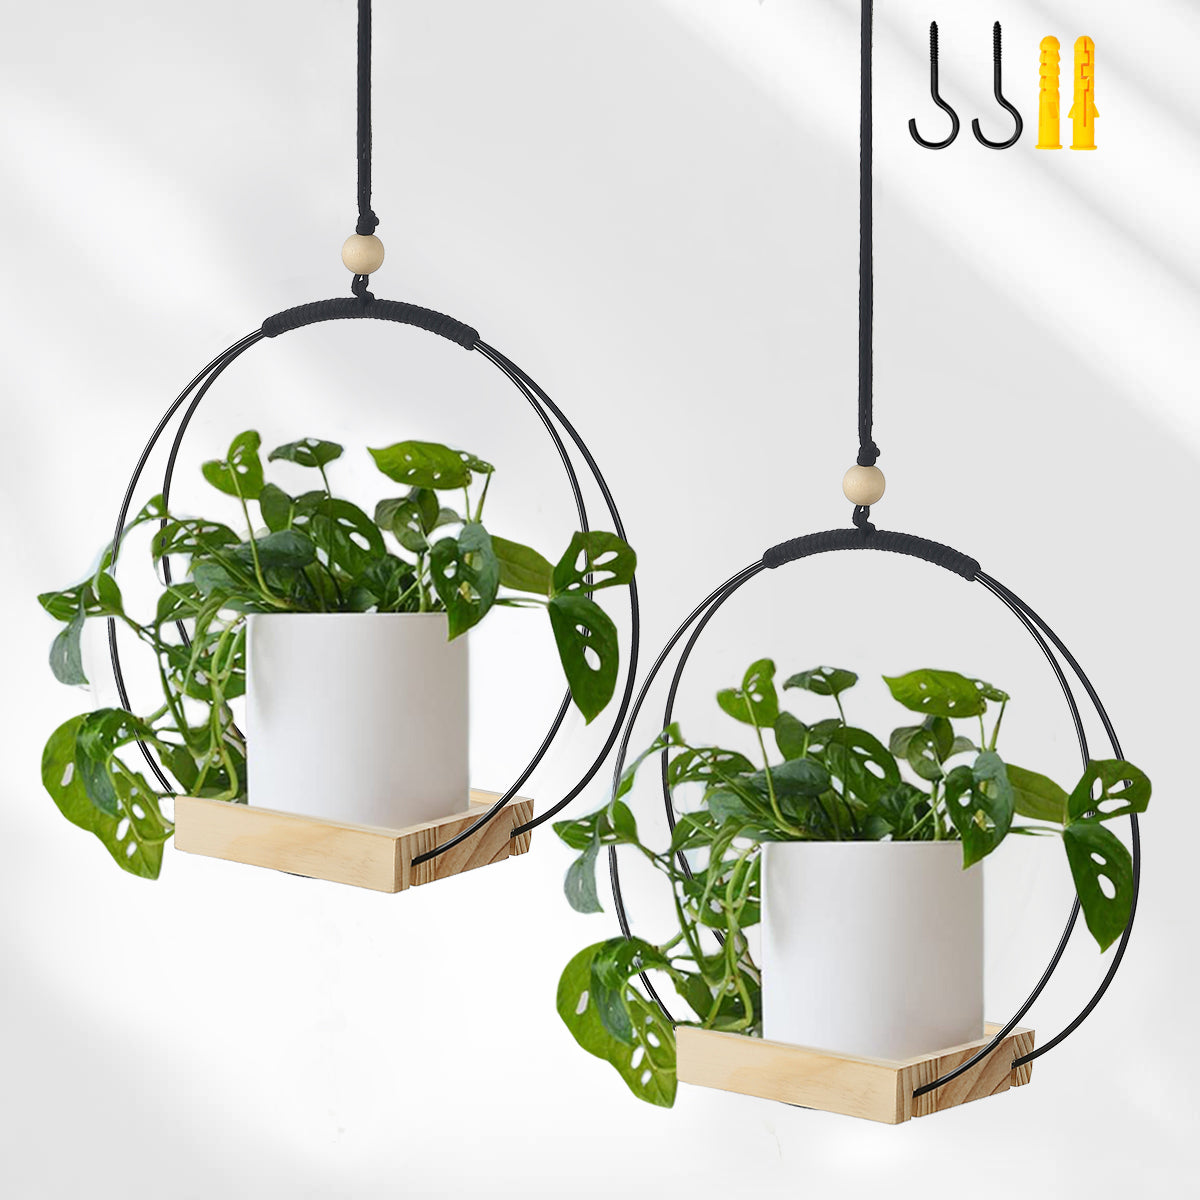 Buy Now Plant Hanger with Wood Base Online | ShinelohaBuy Now Plant Hanger with Wood Base Online | Shineloha